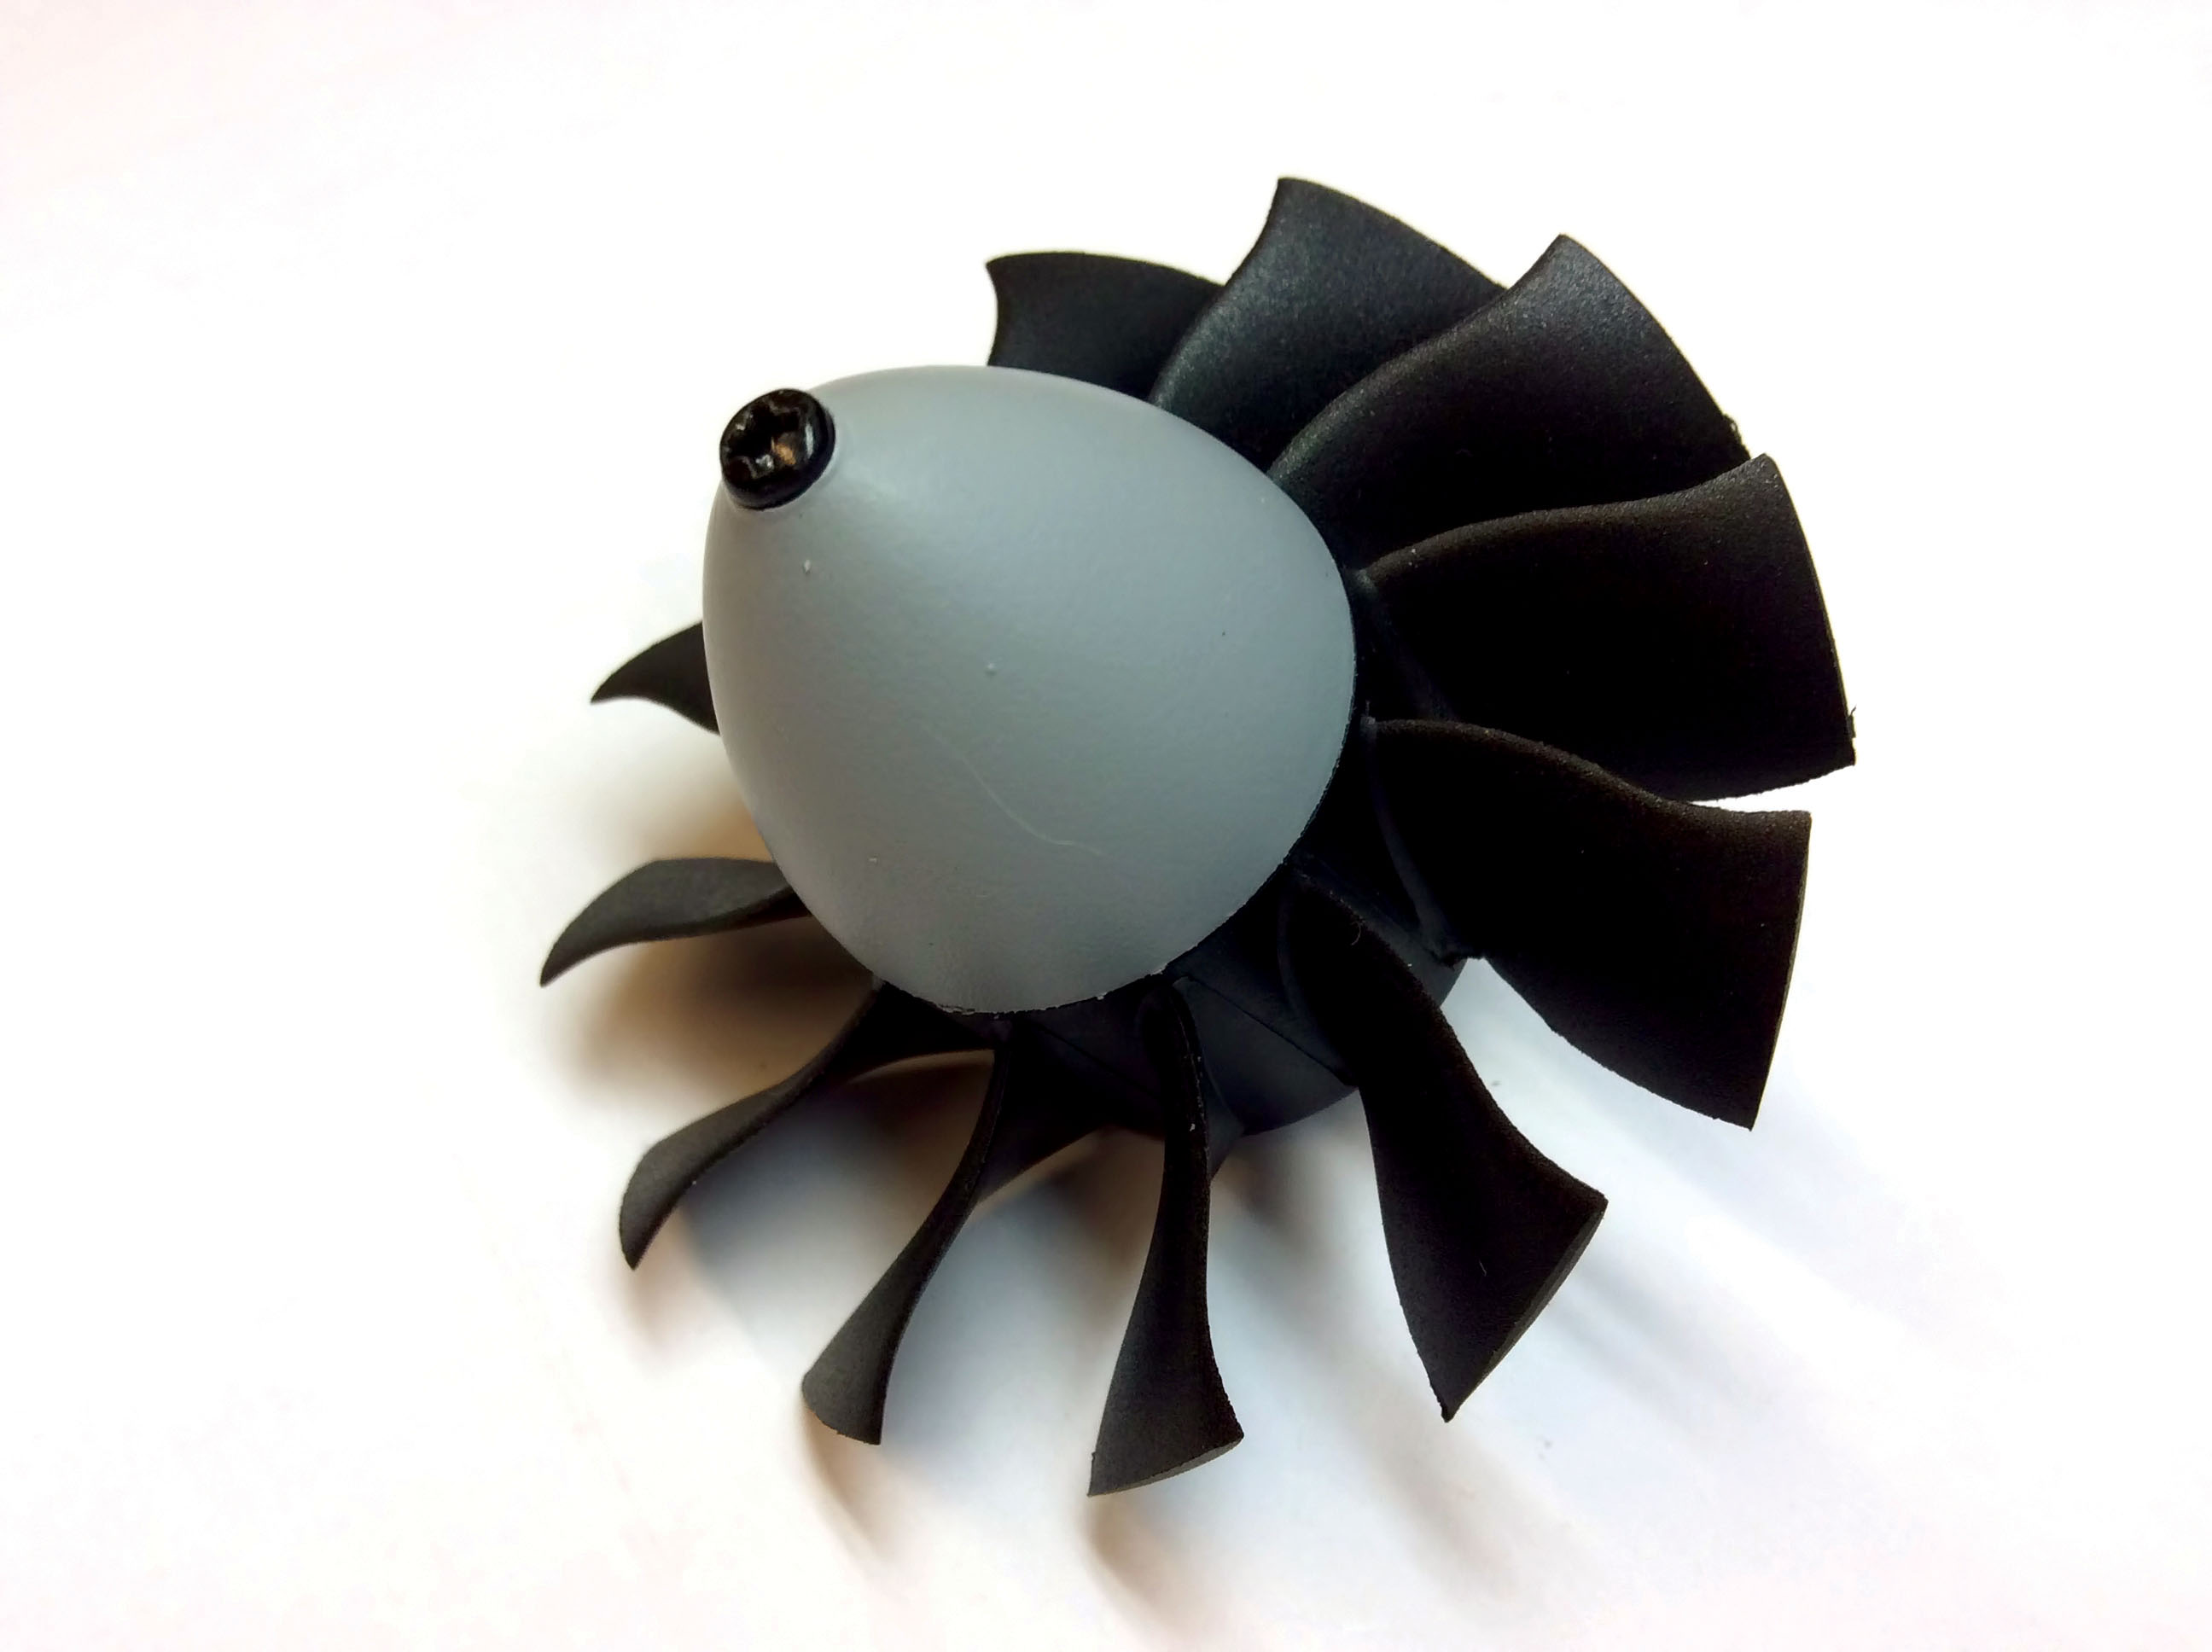 a close-up of the impeller used in a typical edf